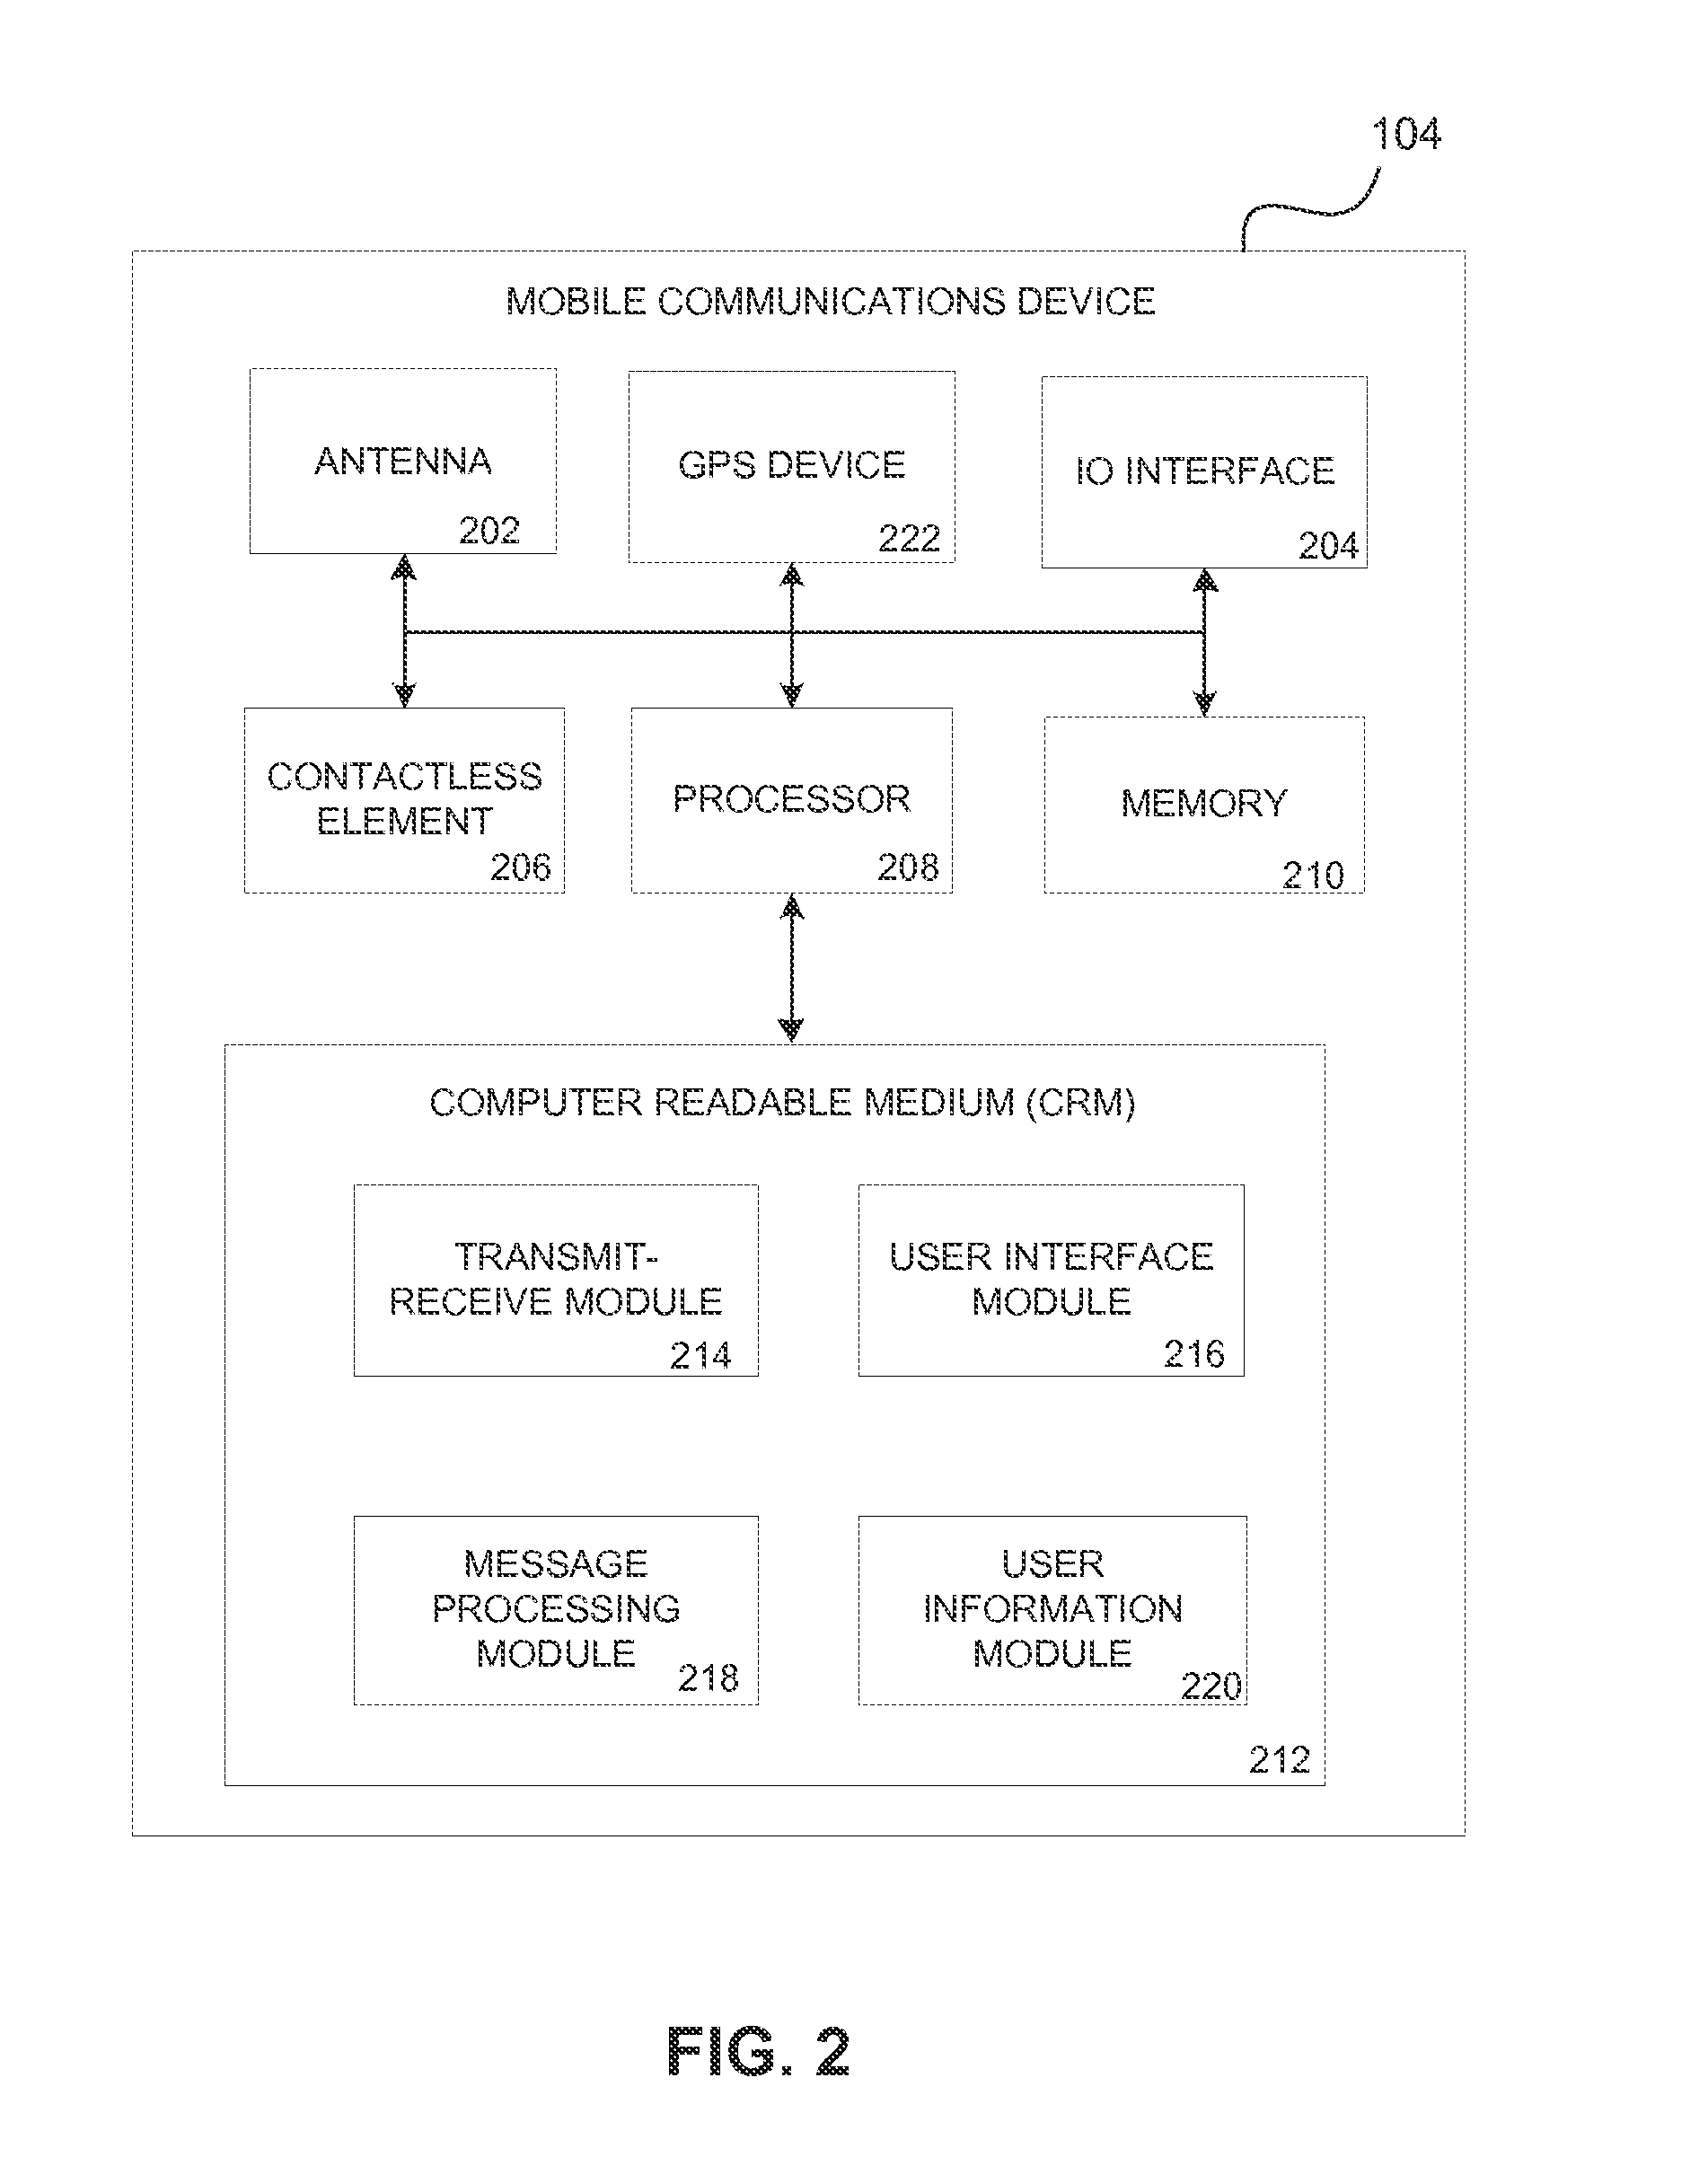 Data security system using mobile communications device